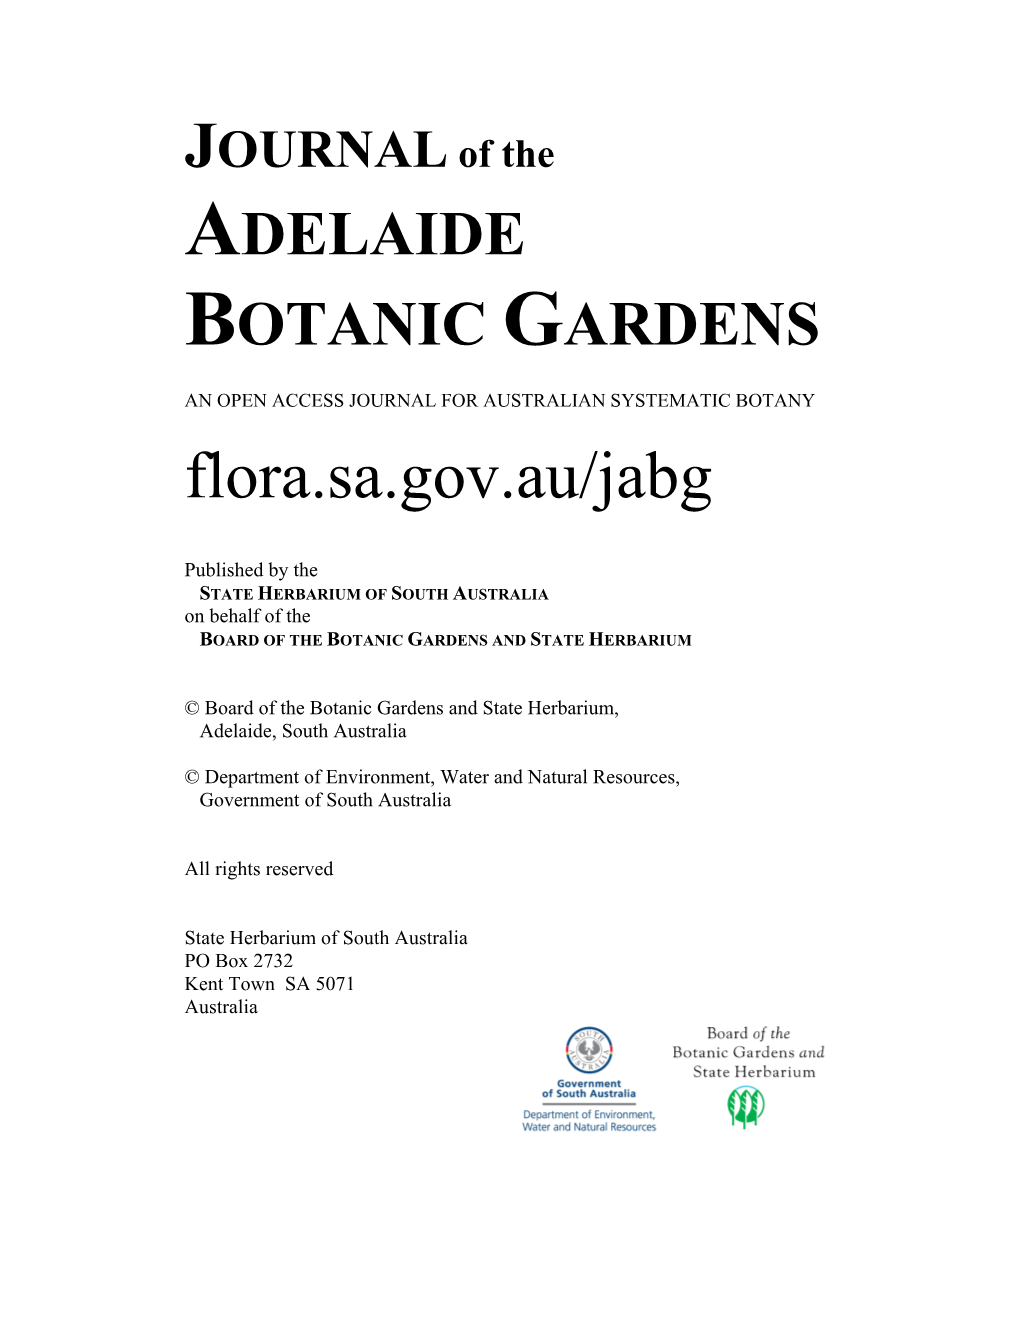 Calostemma Abdicatum (Amaryllidacaeae), a New Species of Garland Lily Endemic to the Everard Ranges, and a Comparison of the Three Species Within Calostemma R.Br